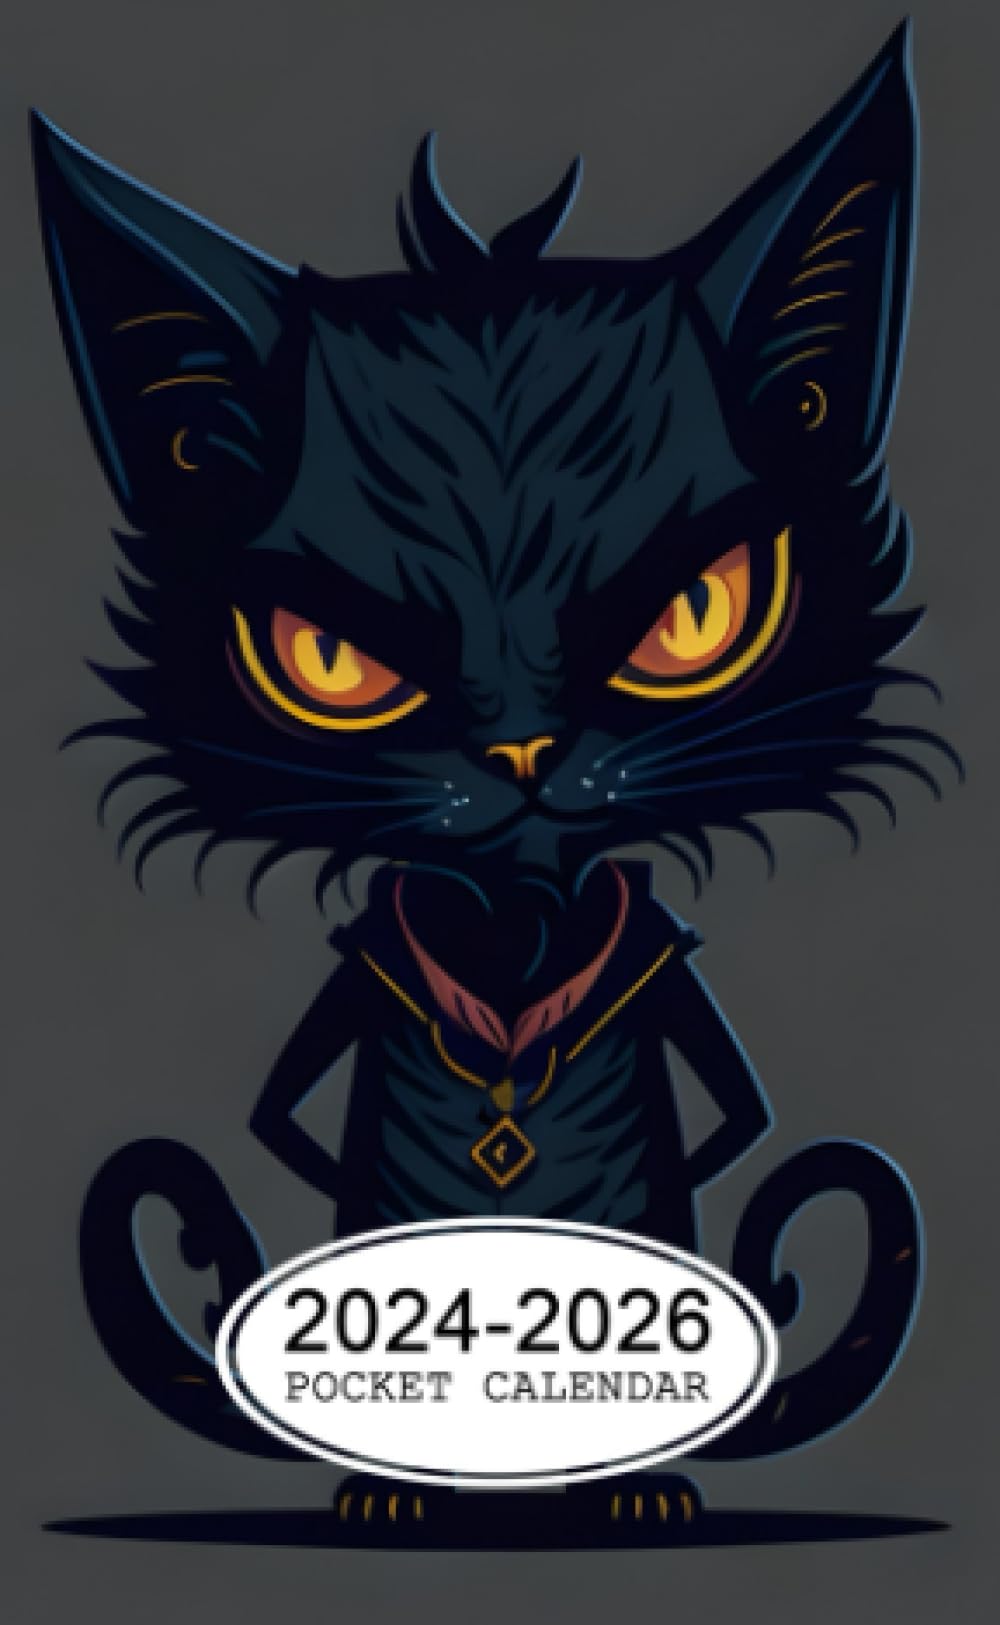 Pocket Calendar 2024-2026: Two-Year Monthly Planner for Purse , 36 Months from January 2024 to December 2026 | Scary cat Halloween character | Fantasy